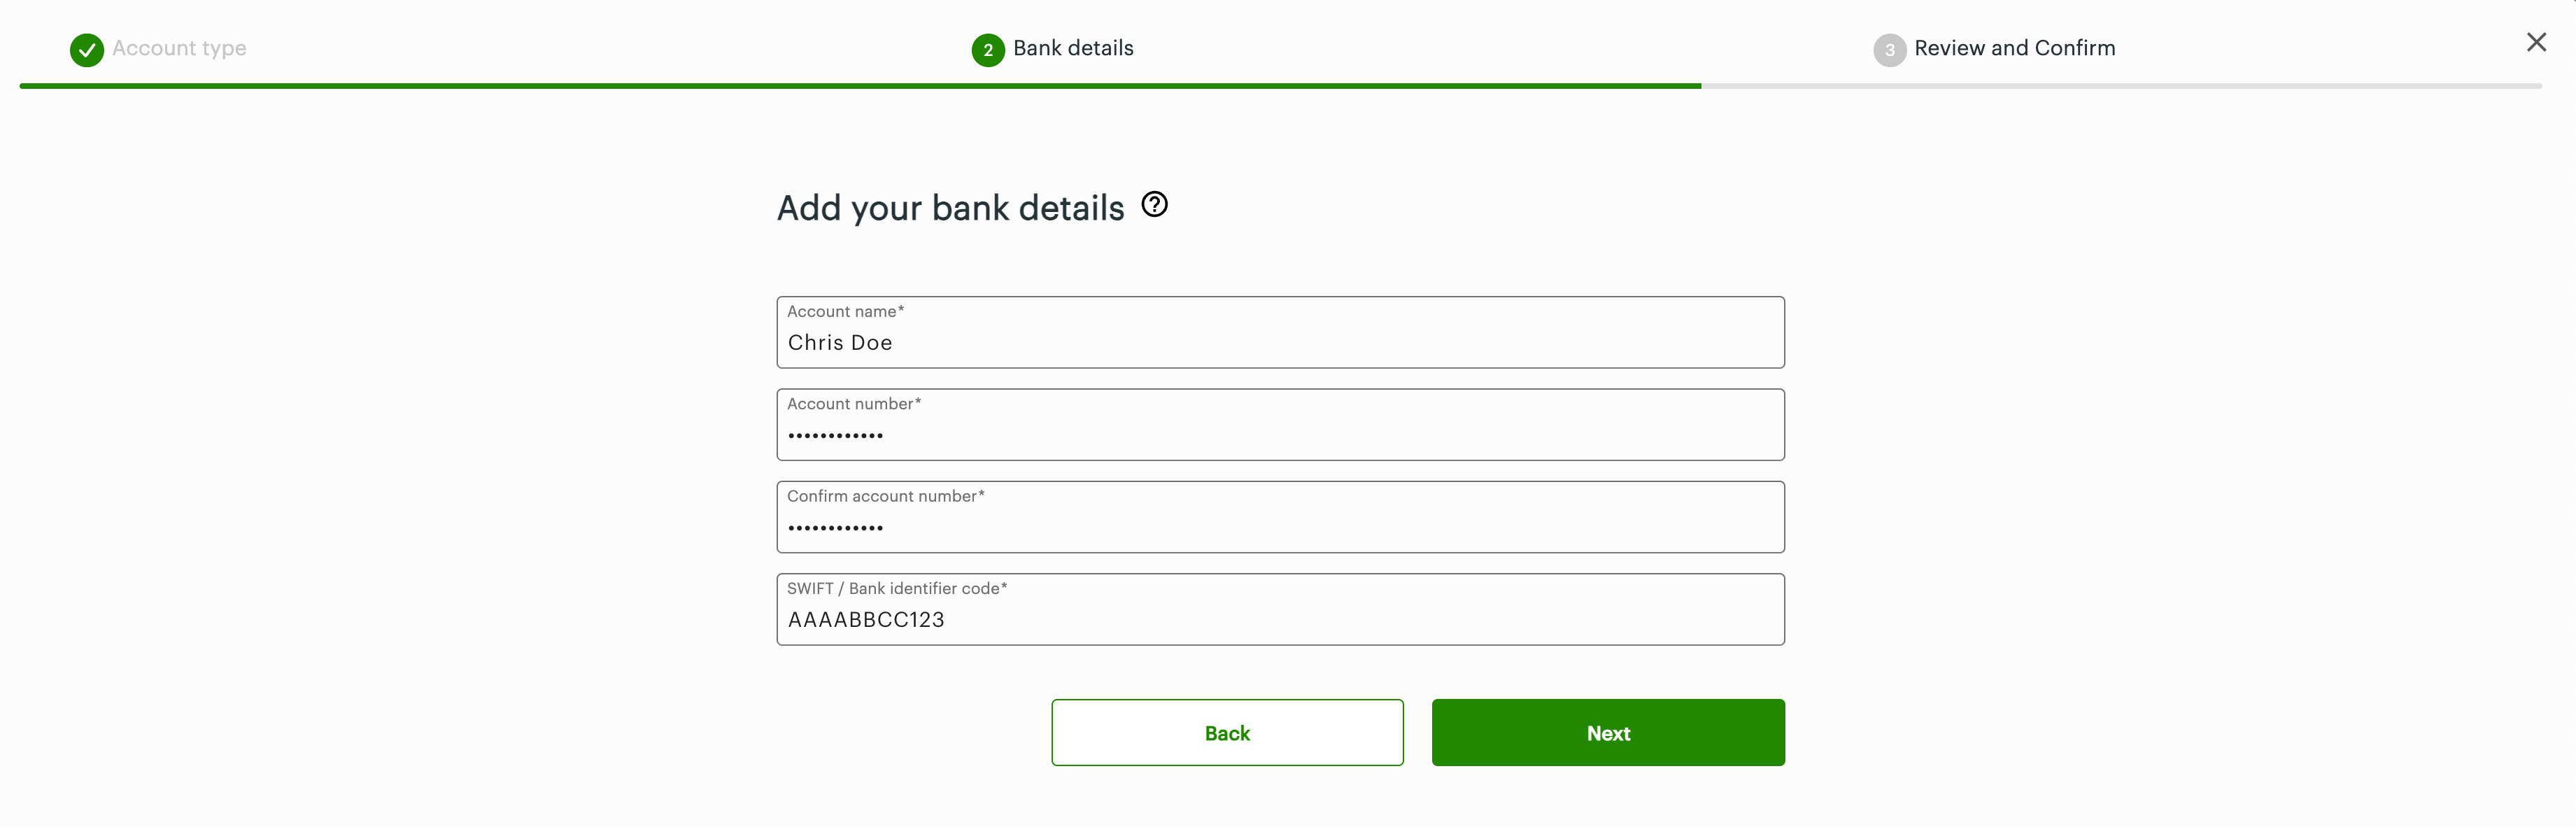 Add your bank details: SWIFT/BIC